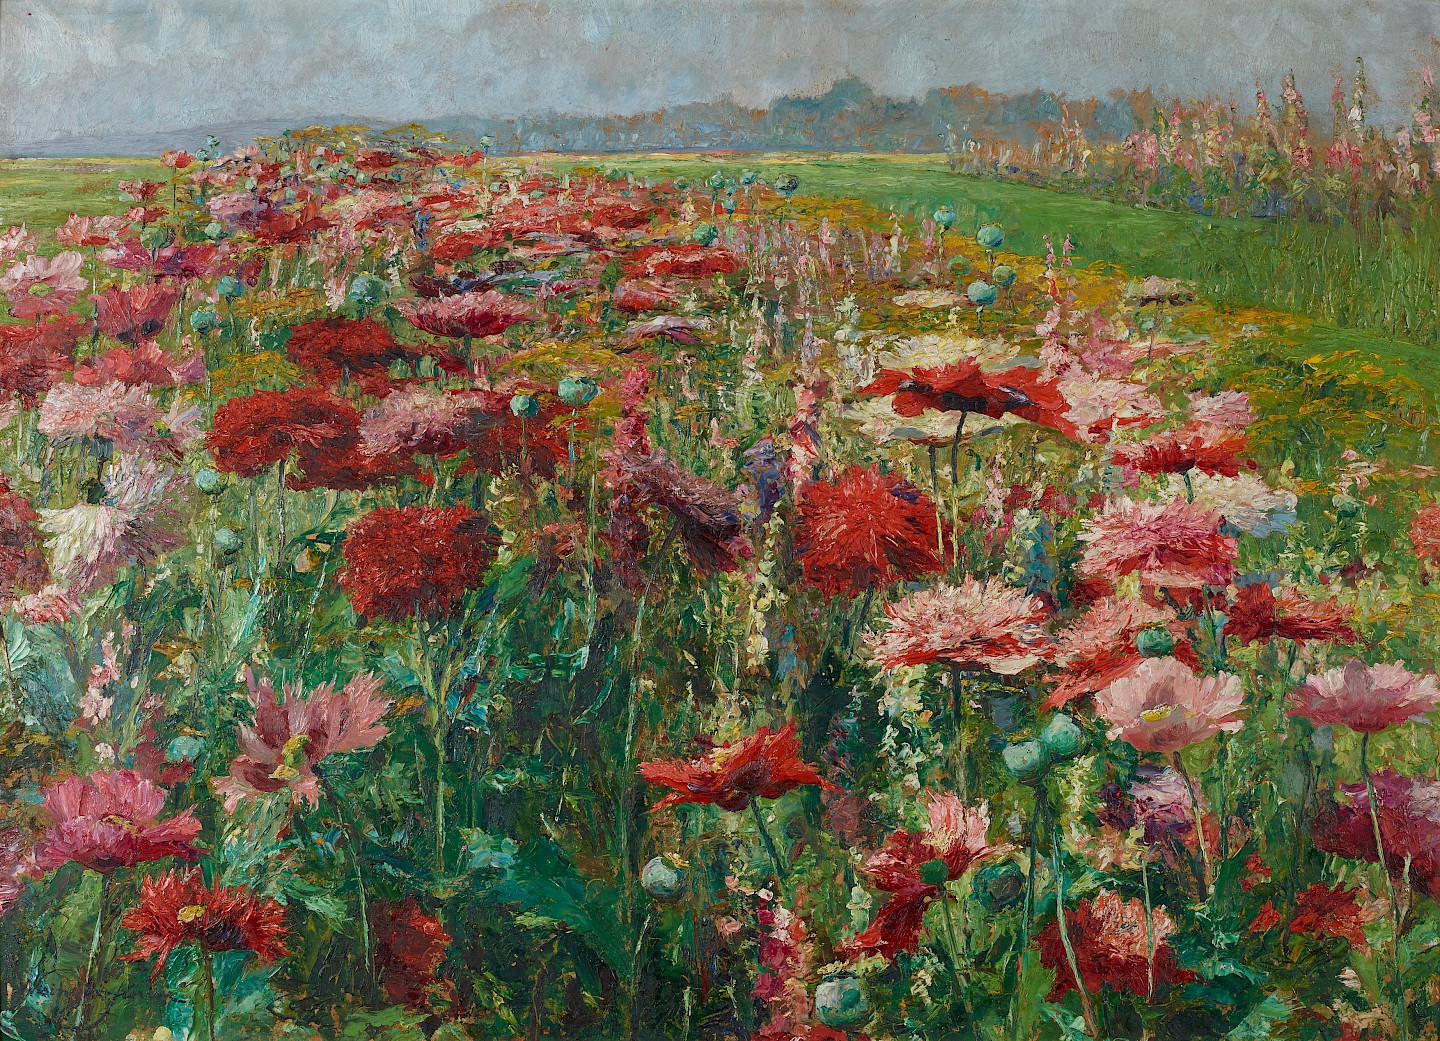 The painting "Blooming Poppyies" by Olga Wisinger-Florian from the Belvedere in Vienna